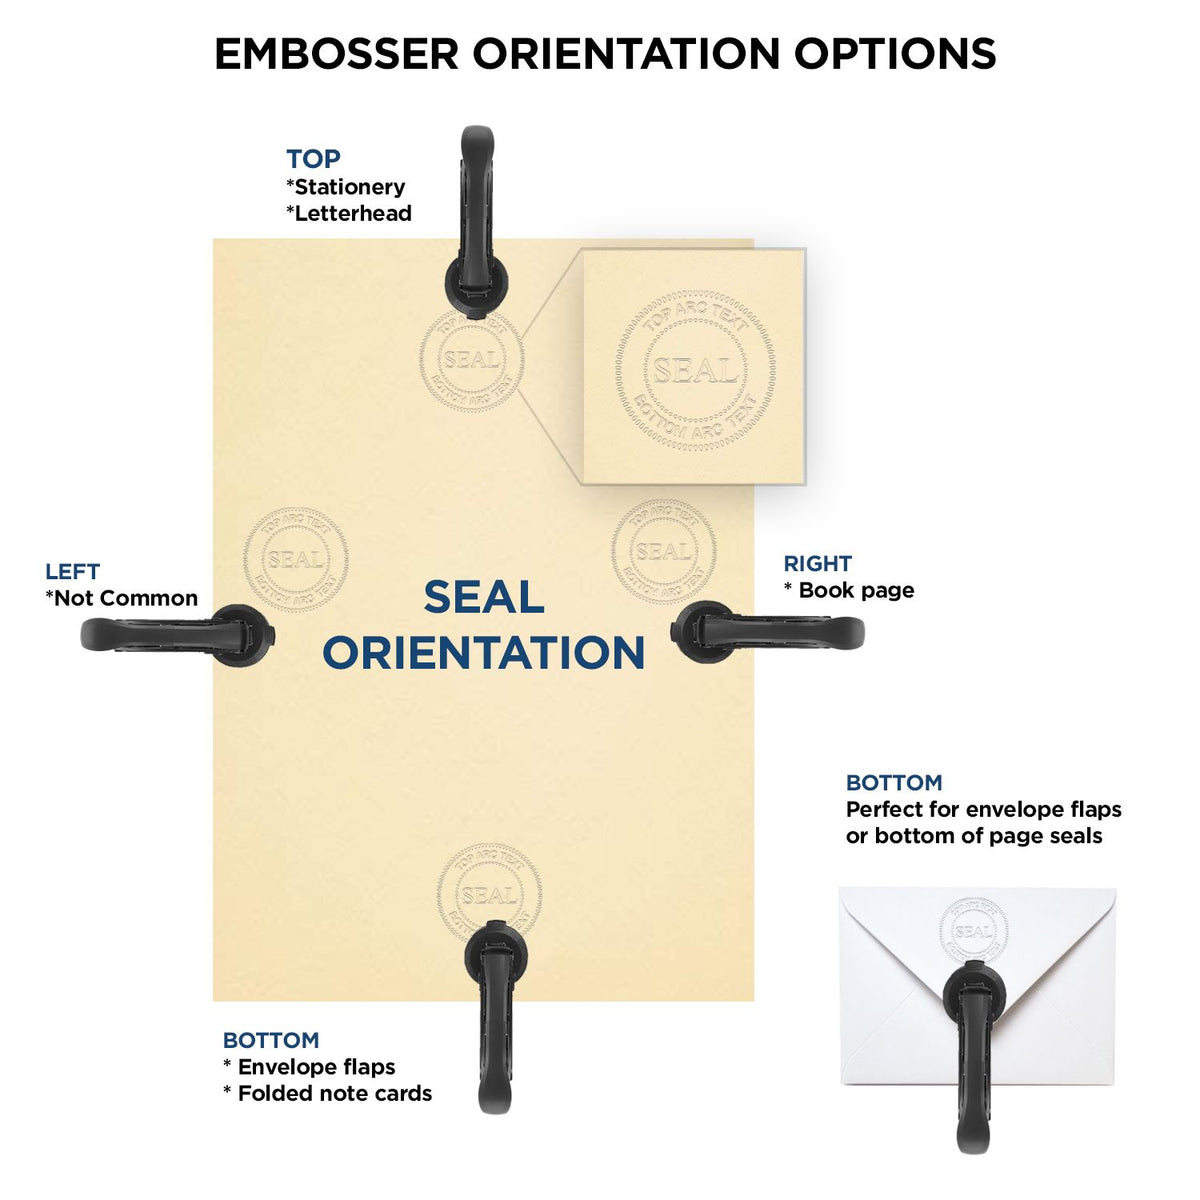 An infographic for the Handheld Kentucky Architect Seal Embosser showing embosser orientation, this is showing examples of a top, bottom, right and left insert.